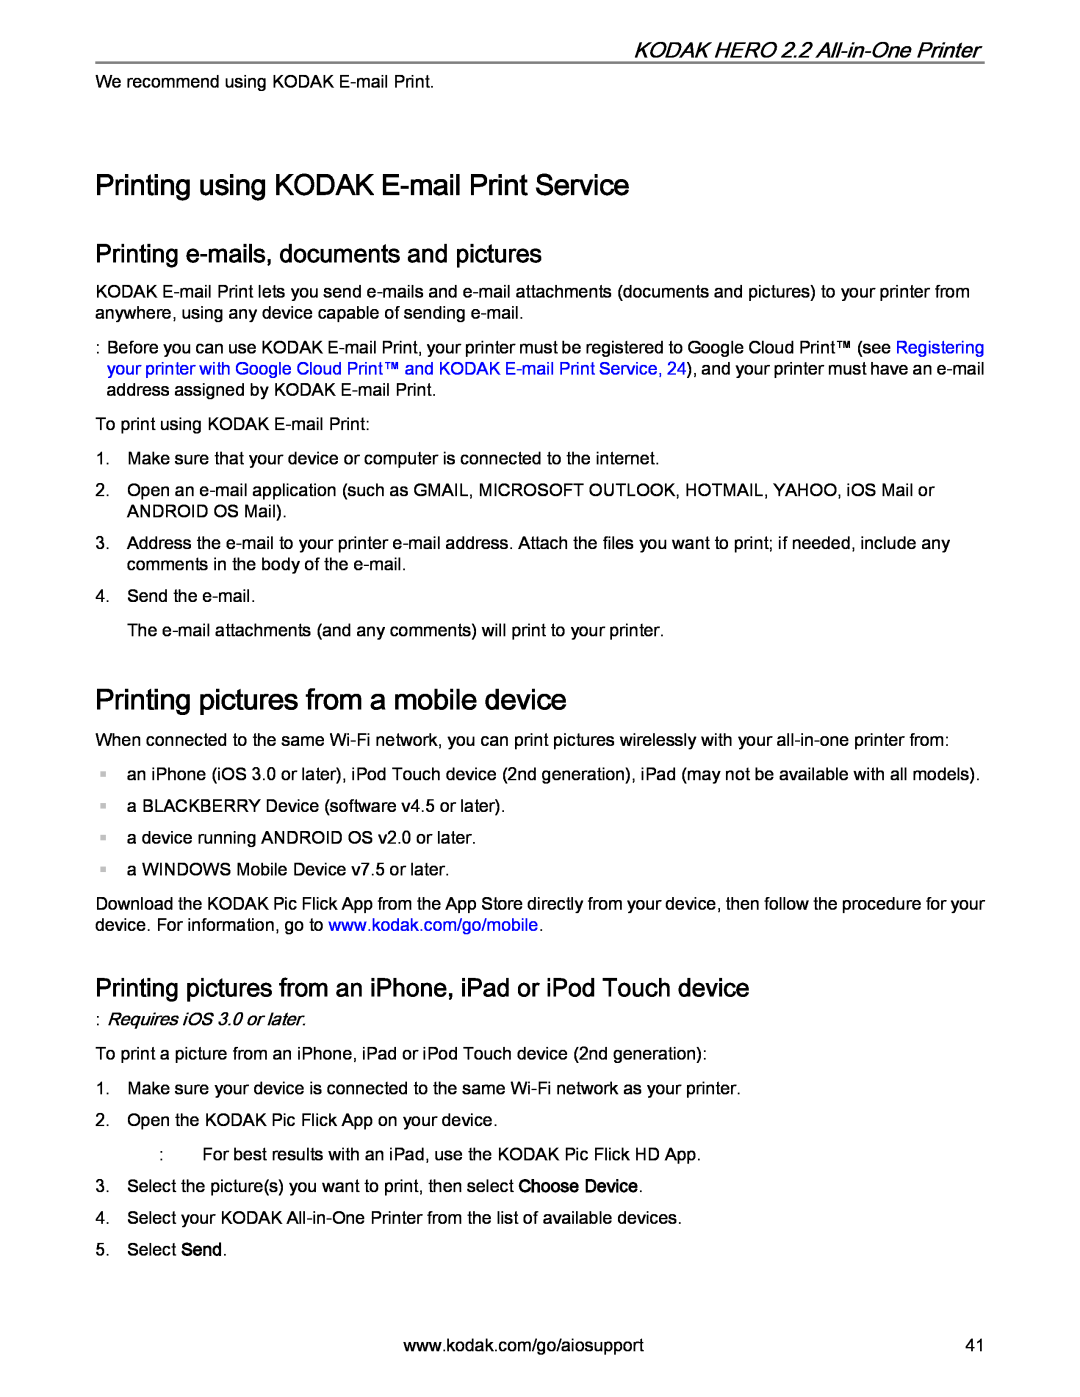 Kodak 2.2 Printing using KODAK E-mail Print Service, Printing pictures from a mobile device, Requires iOS 3.0 or later 